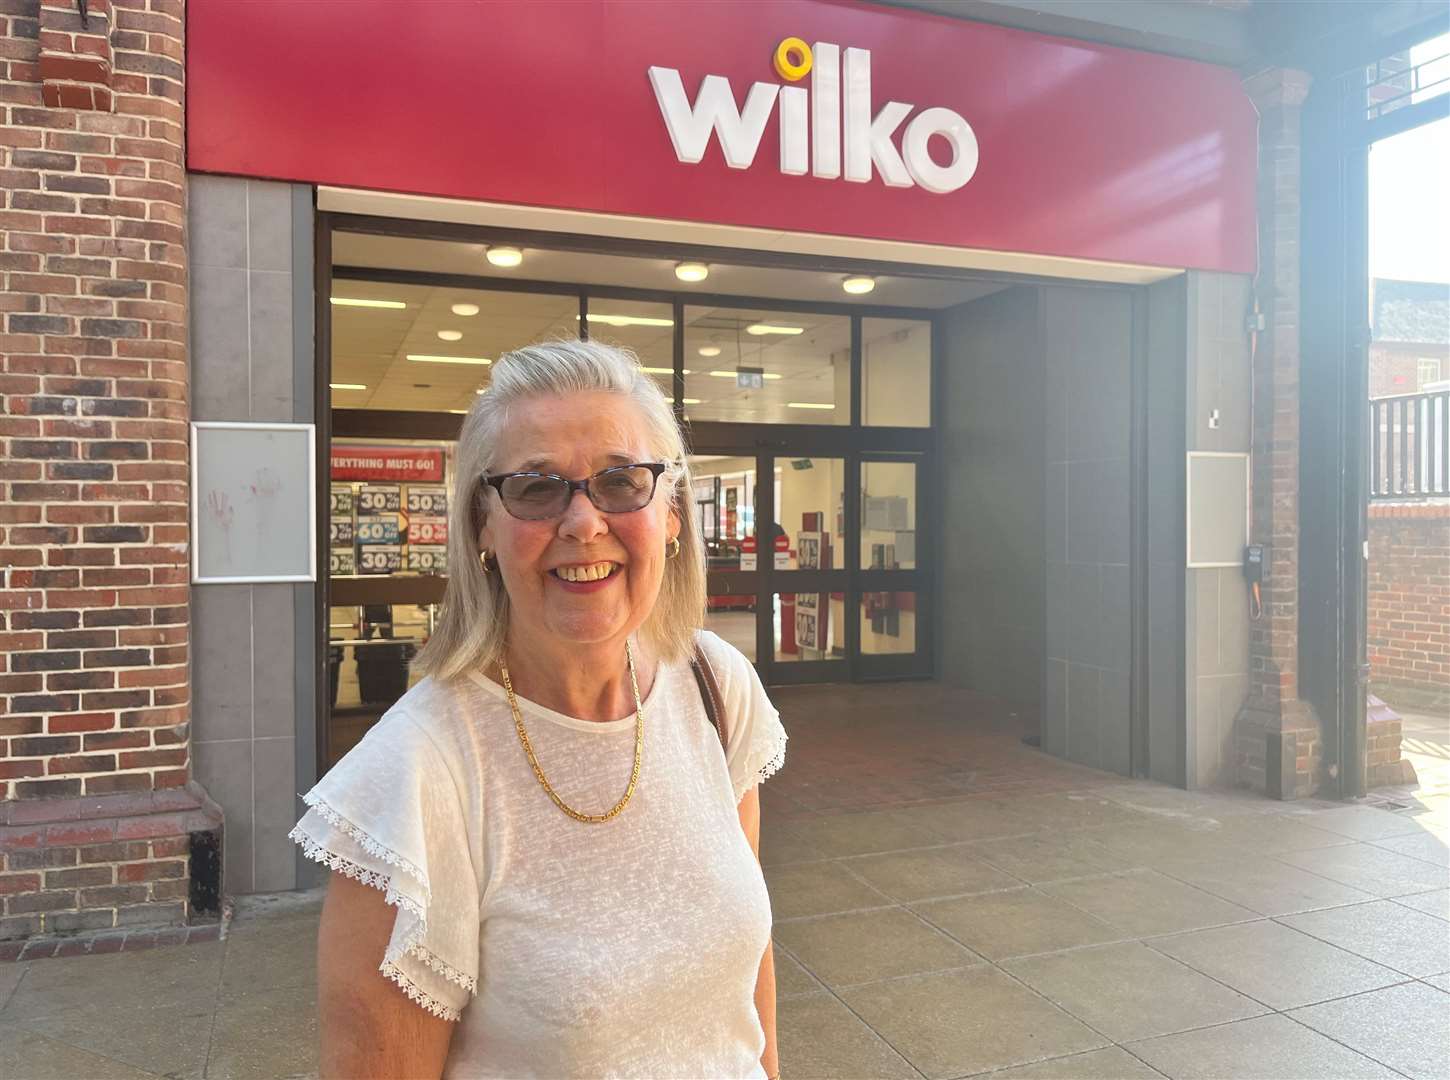 Susan Bartlett does not believe in shopping online so is sad at the loss of Wilko